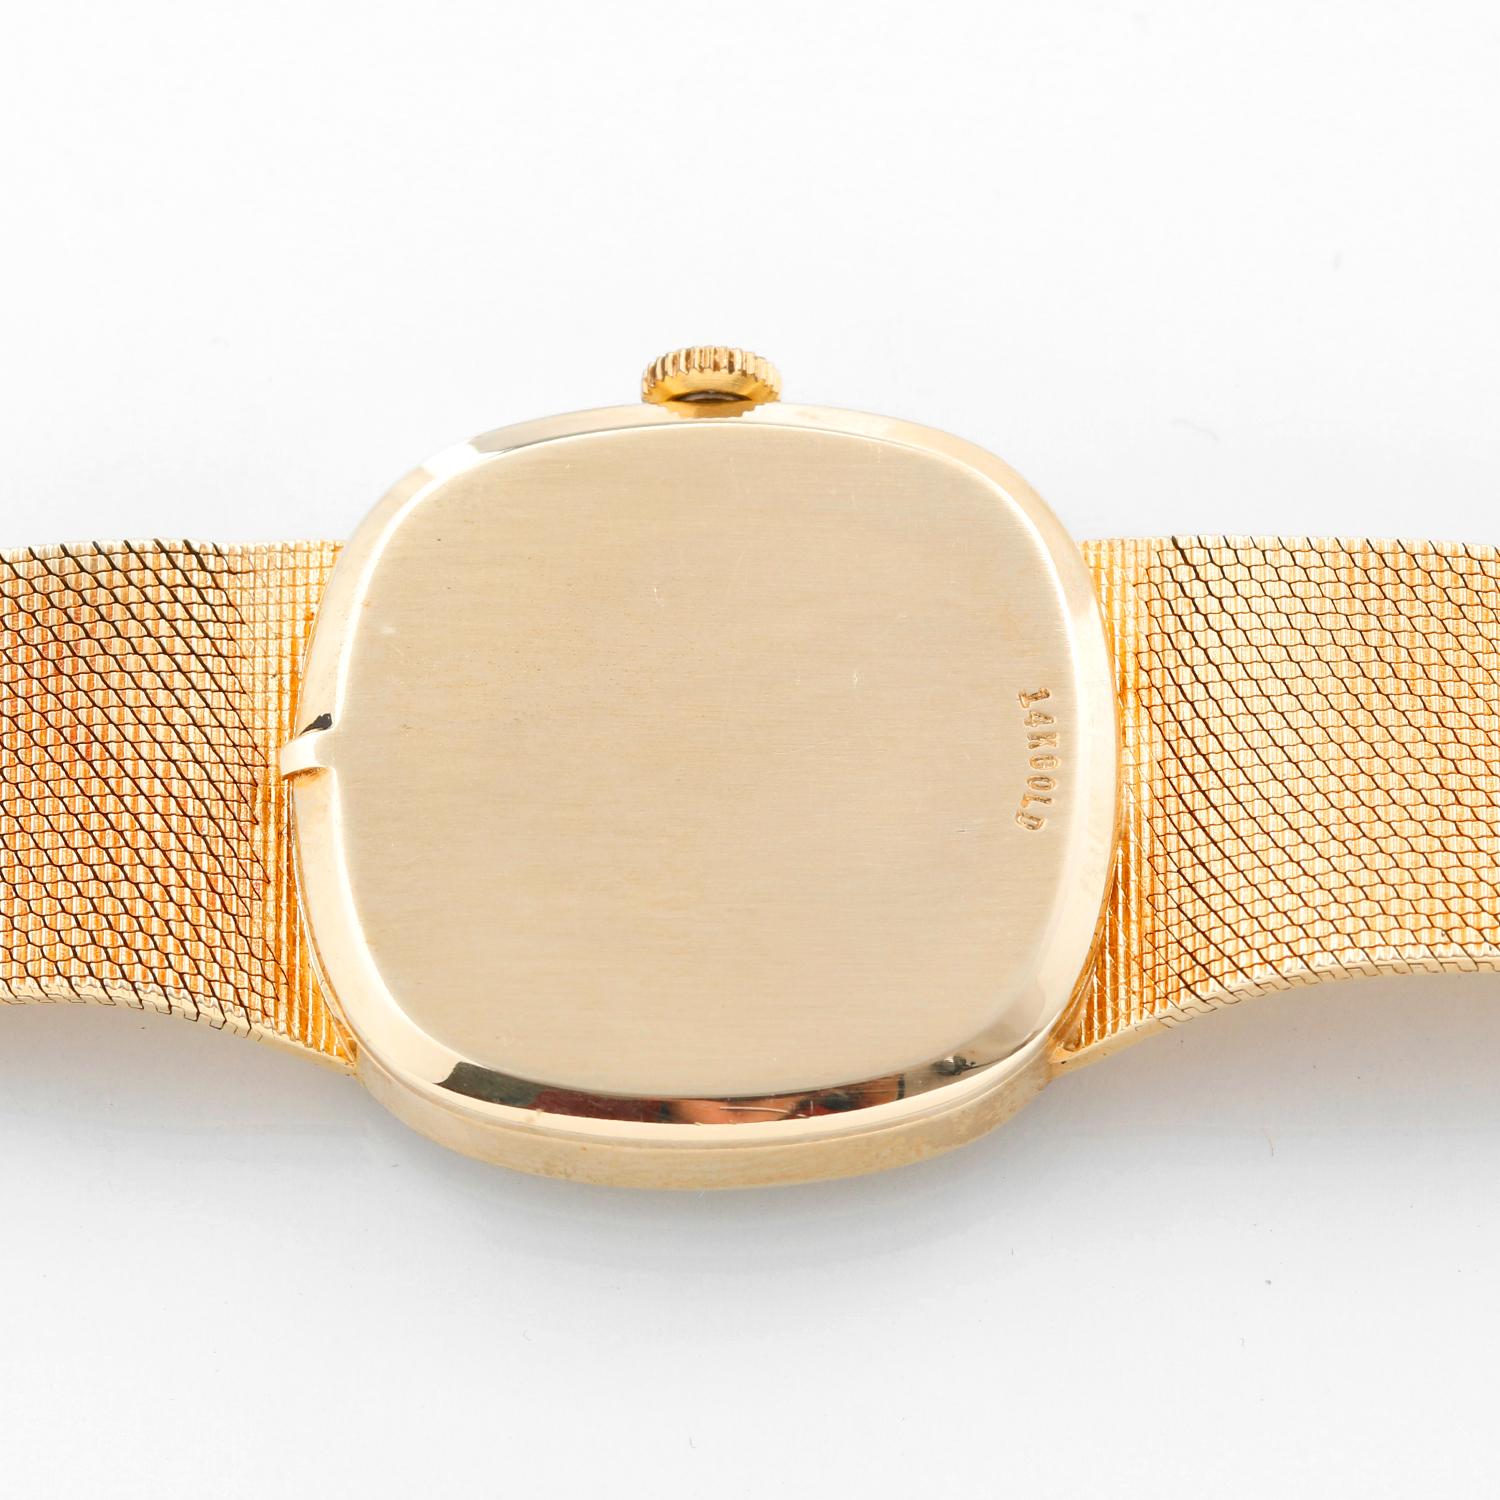 Vintage Omega Automatic 14k Yellow Gold Men's  Dress Watch - Automatic winding. 14k yellow gold textured case (32mm diameter). Gold textured dial with stick markers. Integrated 14k yellow gold mesh bracelet (will fit apx. 7-1/2 in. wrist). Pre-owned